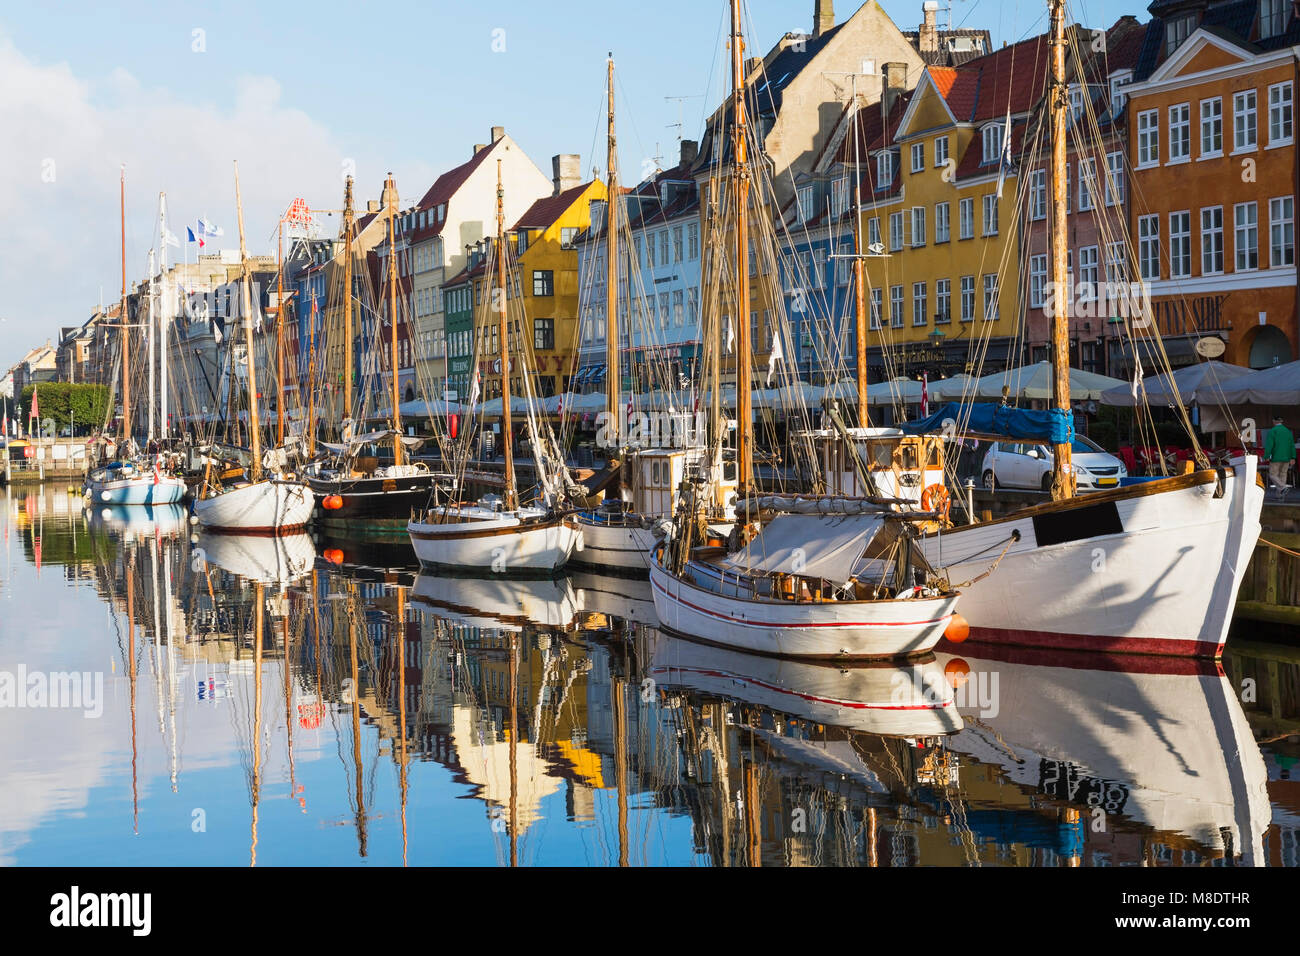 Moored boats and colourful 17th century town houses on Nyhavn canal, Copenhagen, Denmark Stock Photo